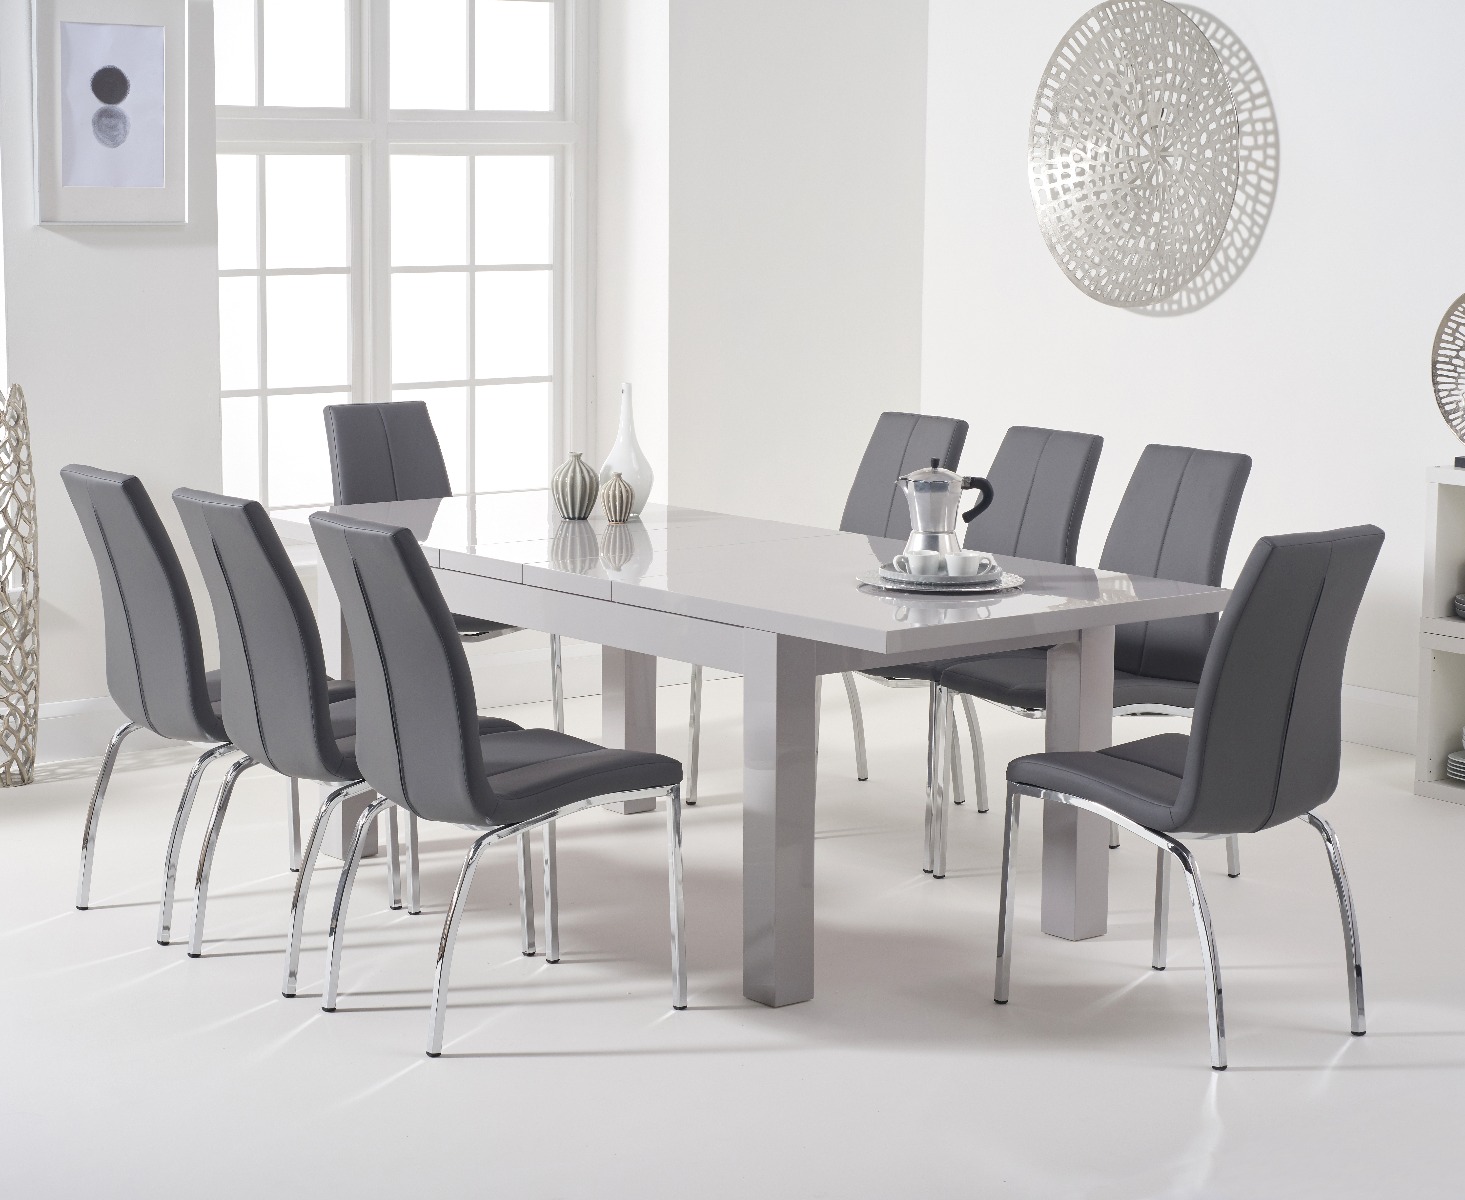 Atlanta Light Grey Gloss 160220cm Extending Dining Table With 6 Grey Cavello Chairs